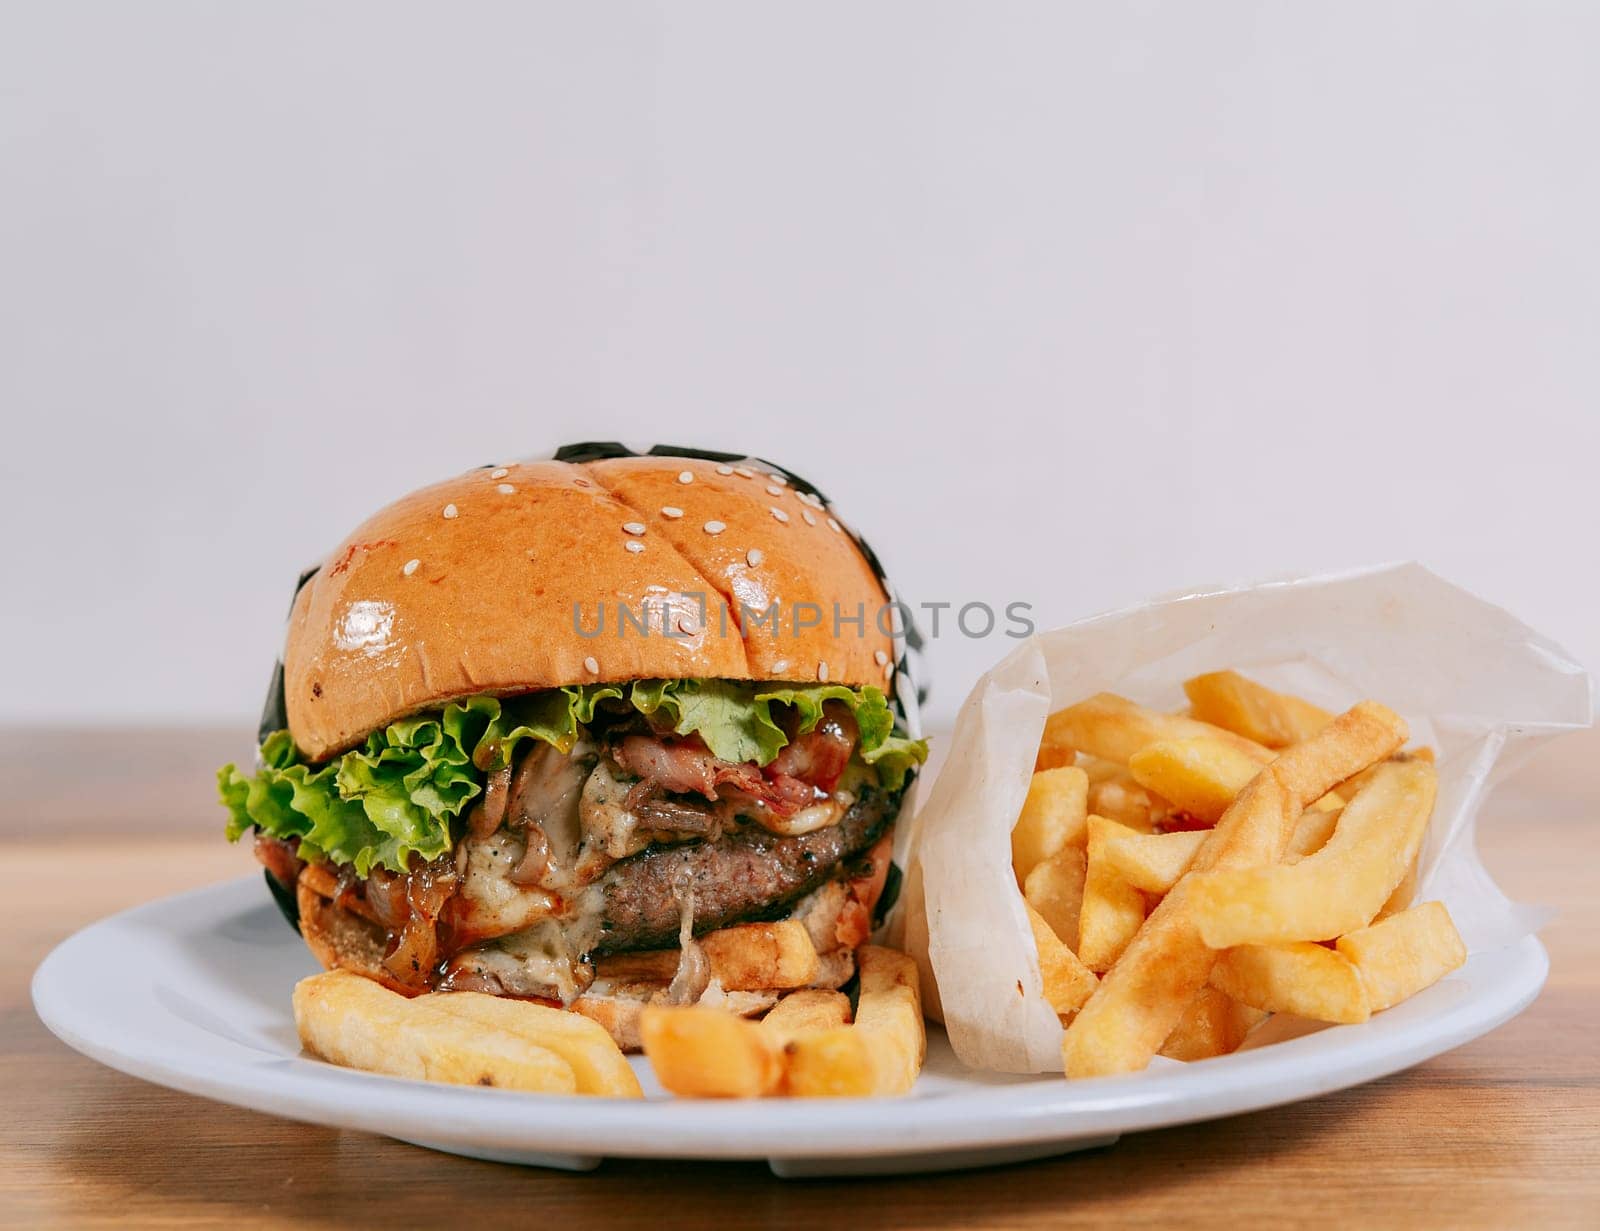 Close up of a delicious hamburger with french fries on wooden table with copy space. Cheeseburger with fries on wooden table by isaiphoto